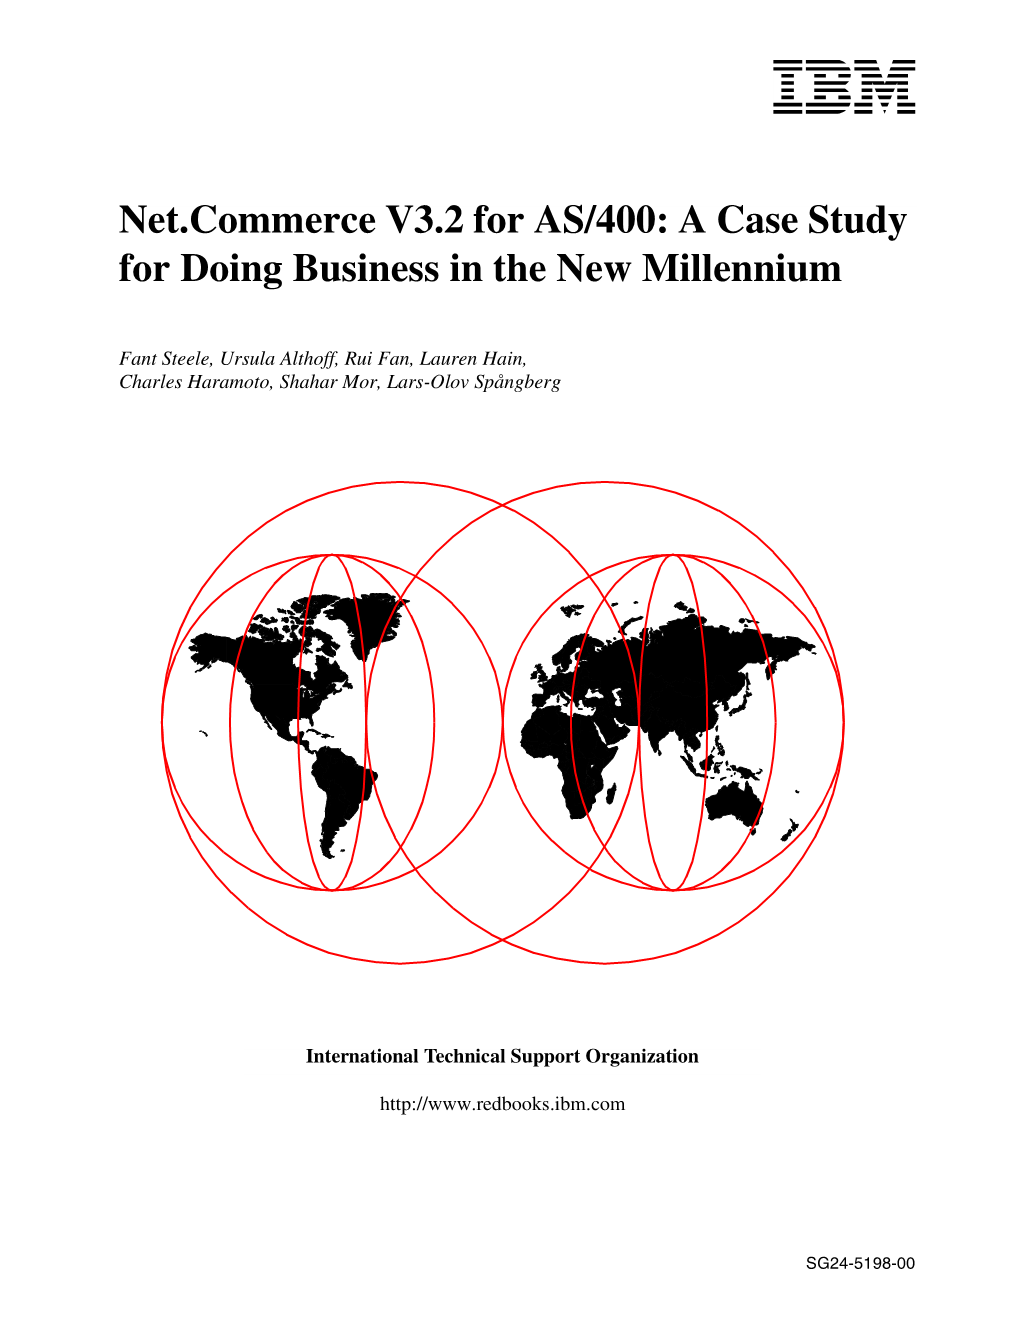 Net.Commerce V3.2 for AS/400: a Case Study for Doing Business in the New Millennium